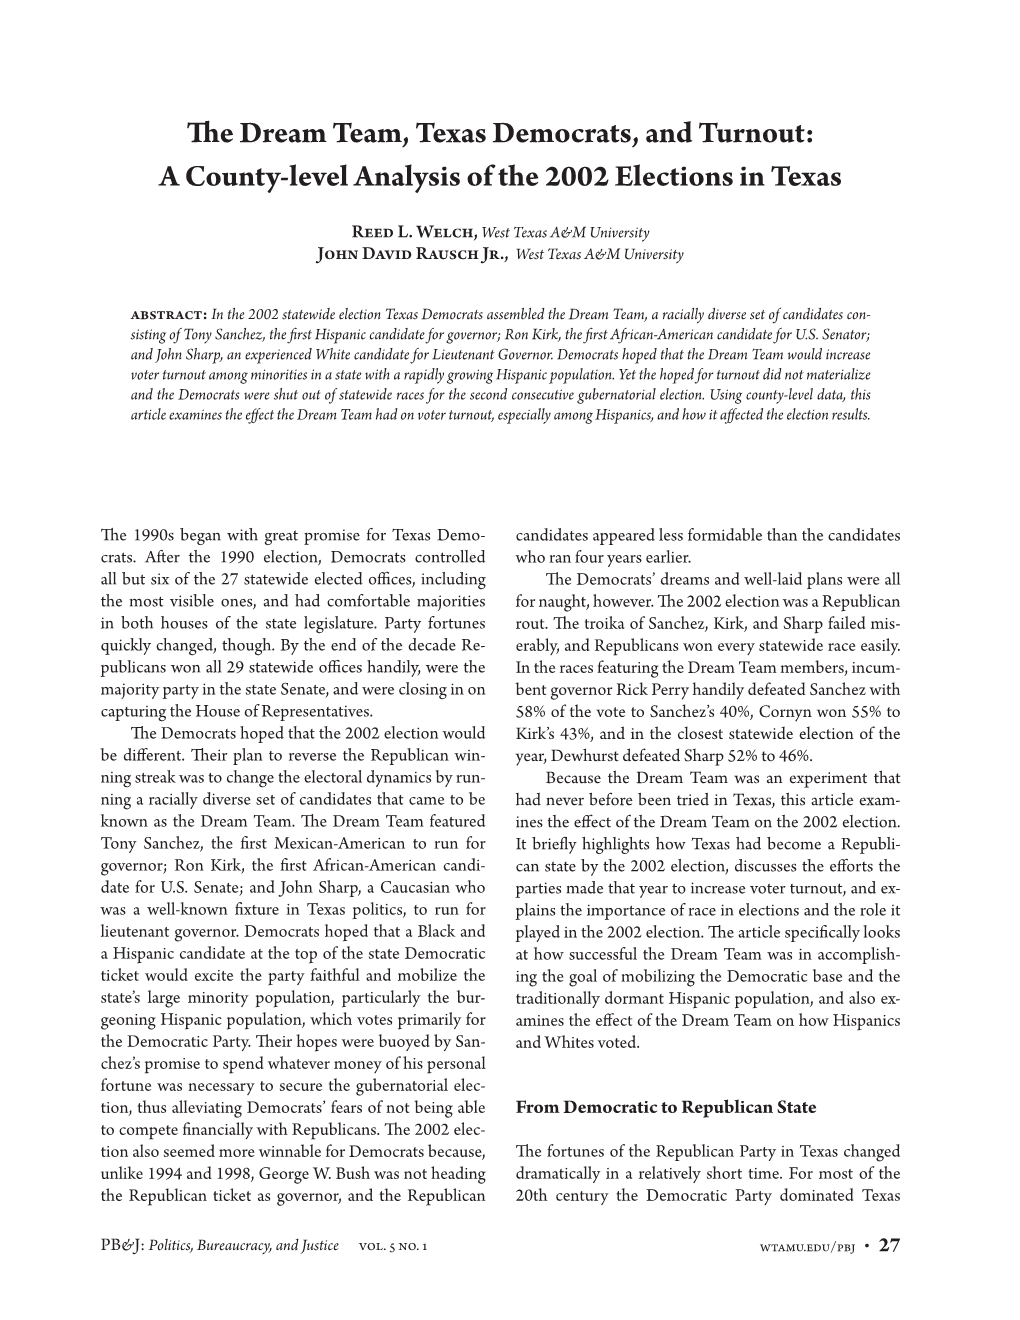 The Dream Team, Texas Democrats, and Turnout: a County-Level Analysis of the 2002 Elections in Texas